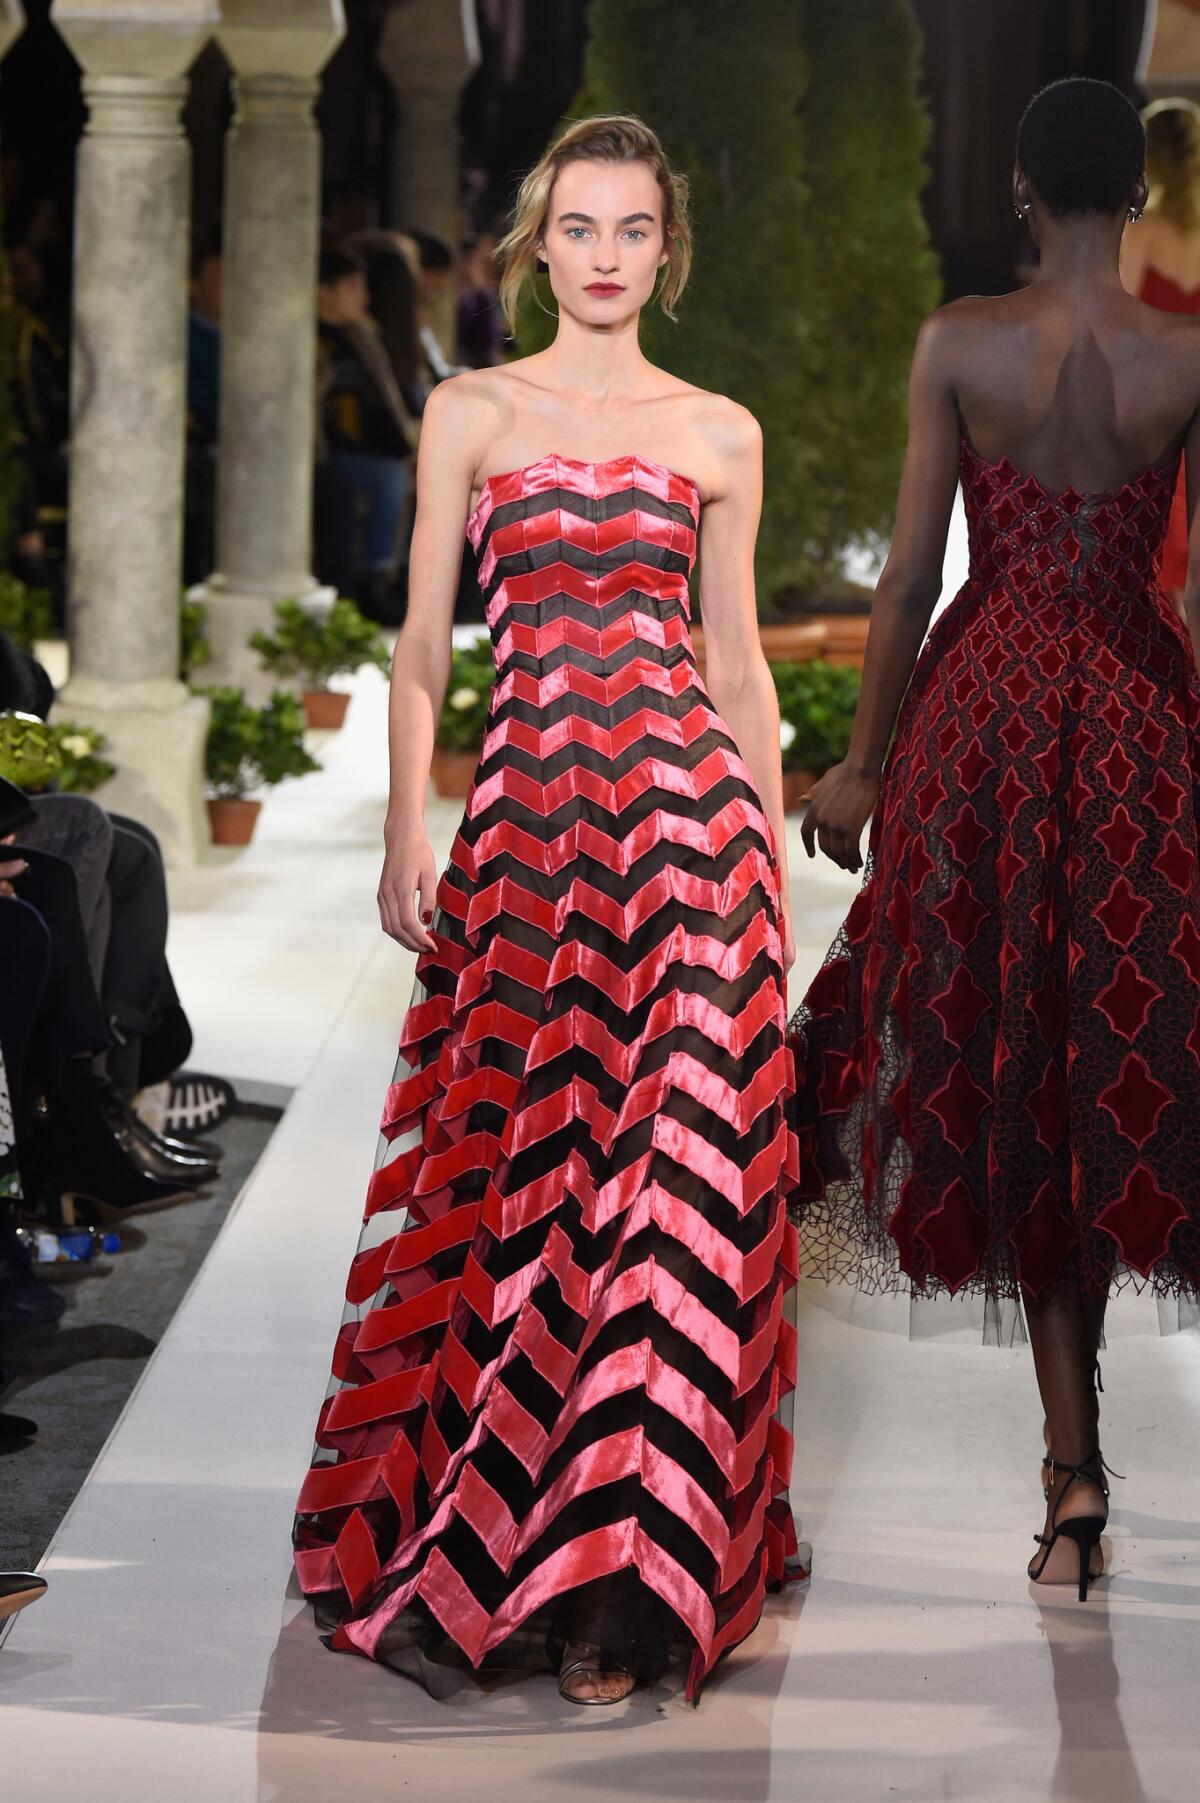 A red-carpet-worthy look from the fall and winter 2019 Oscar de la Renta runway show.